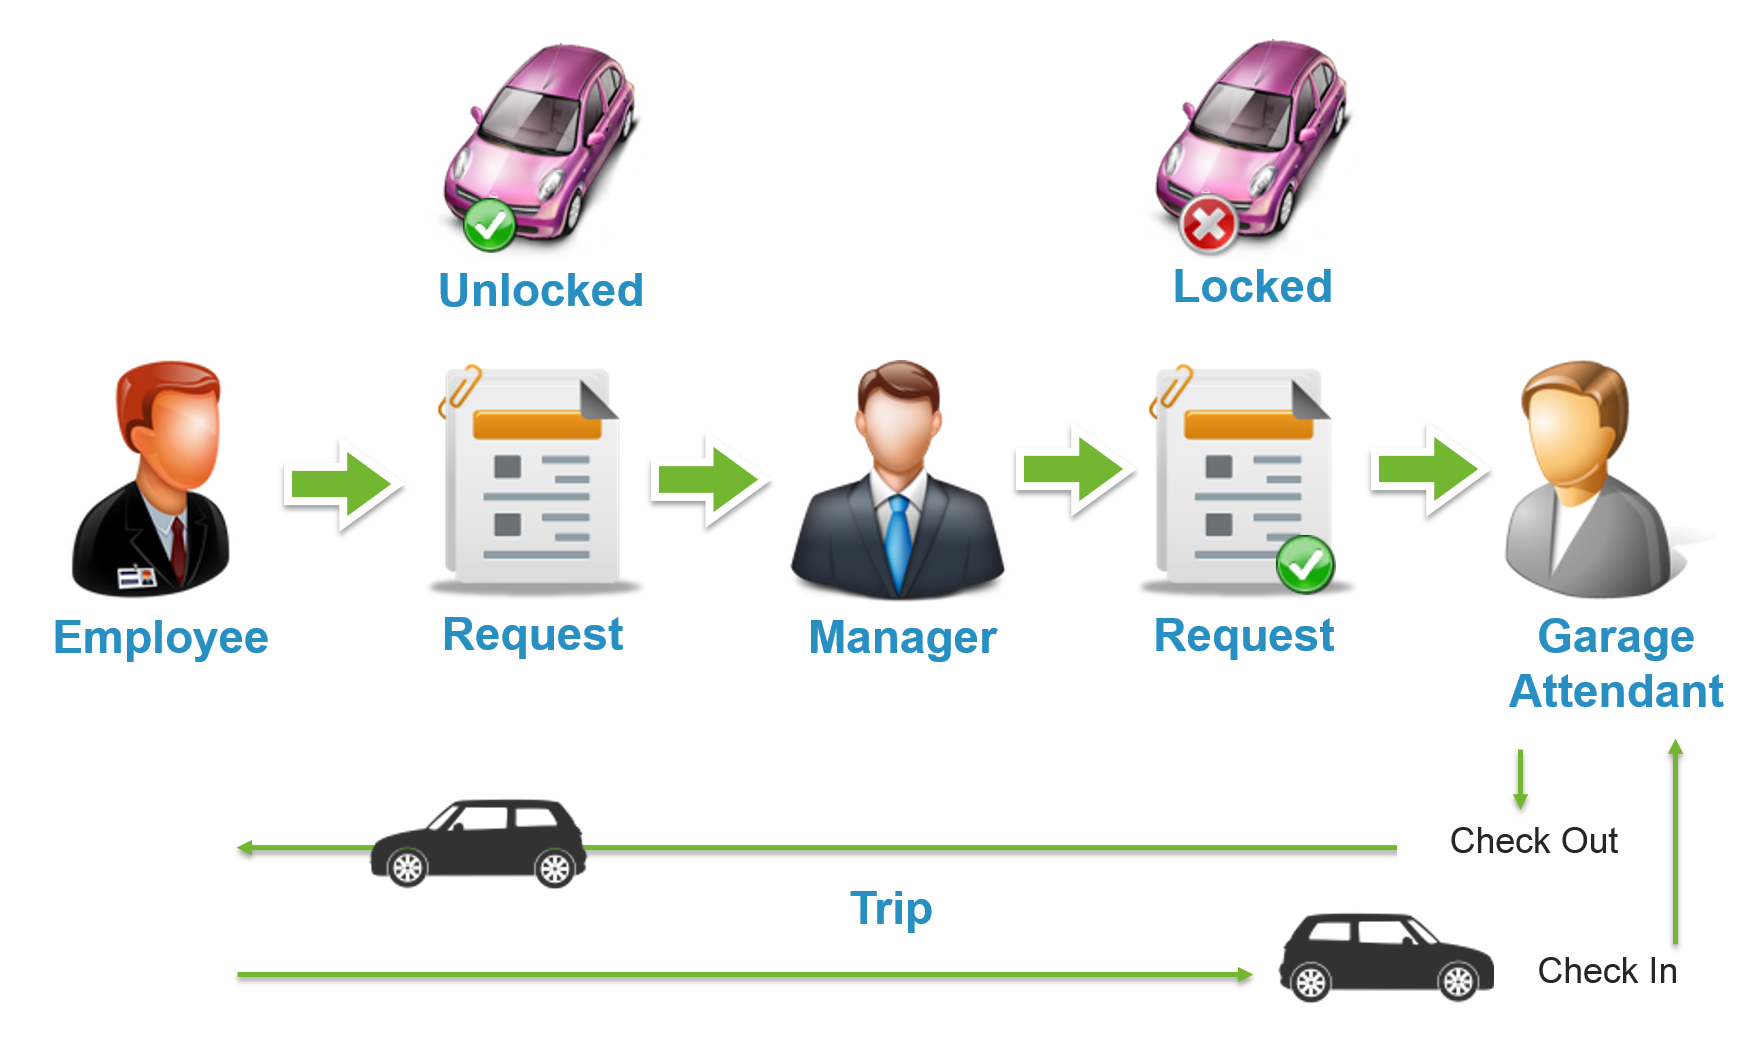 Request manager. Vehicle Management System. VMS view Management System 2.0. Vehicle Parts Management System illustration. Datatable vehicle.